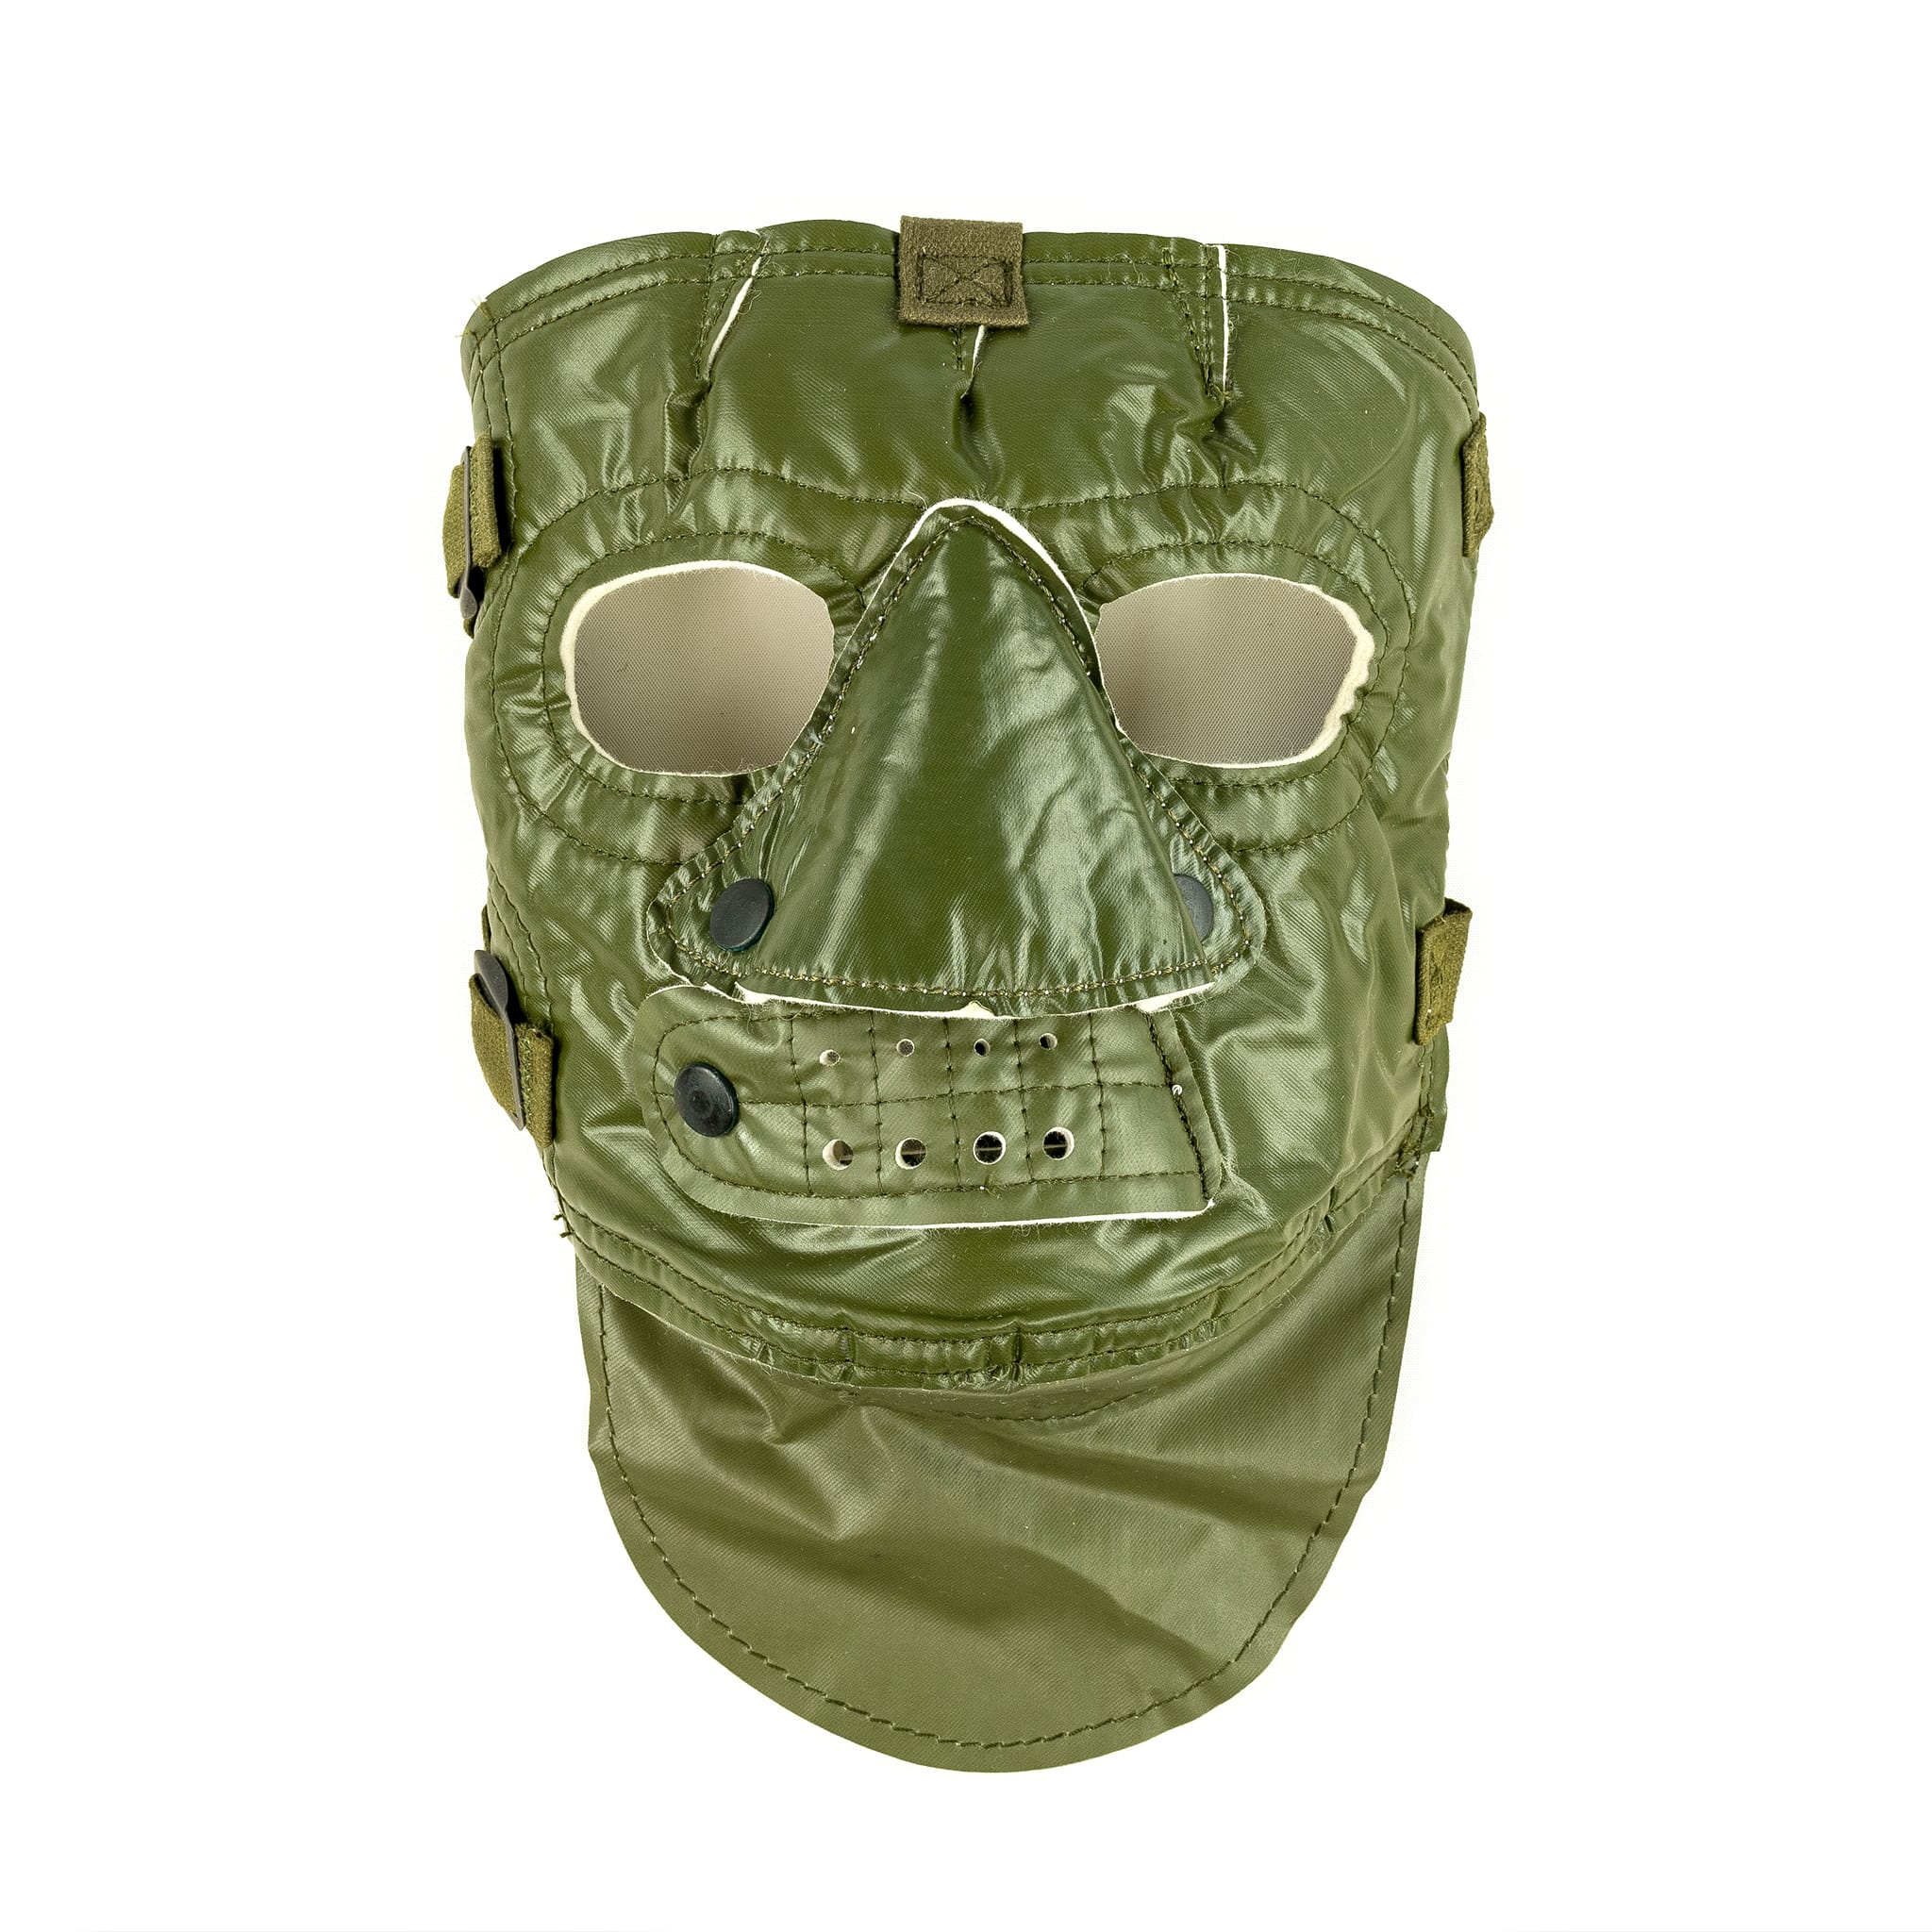 WIND AND SEA military surplus mask cord